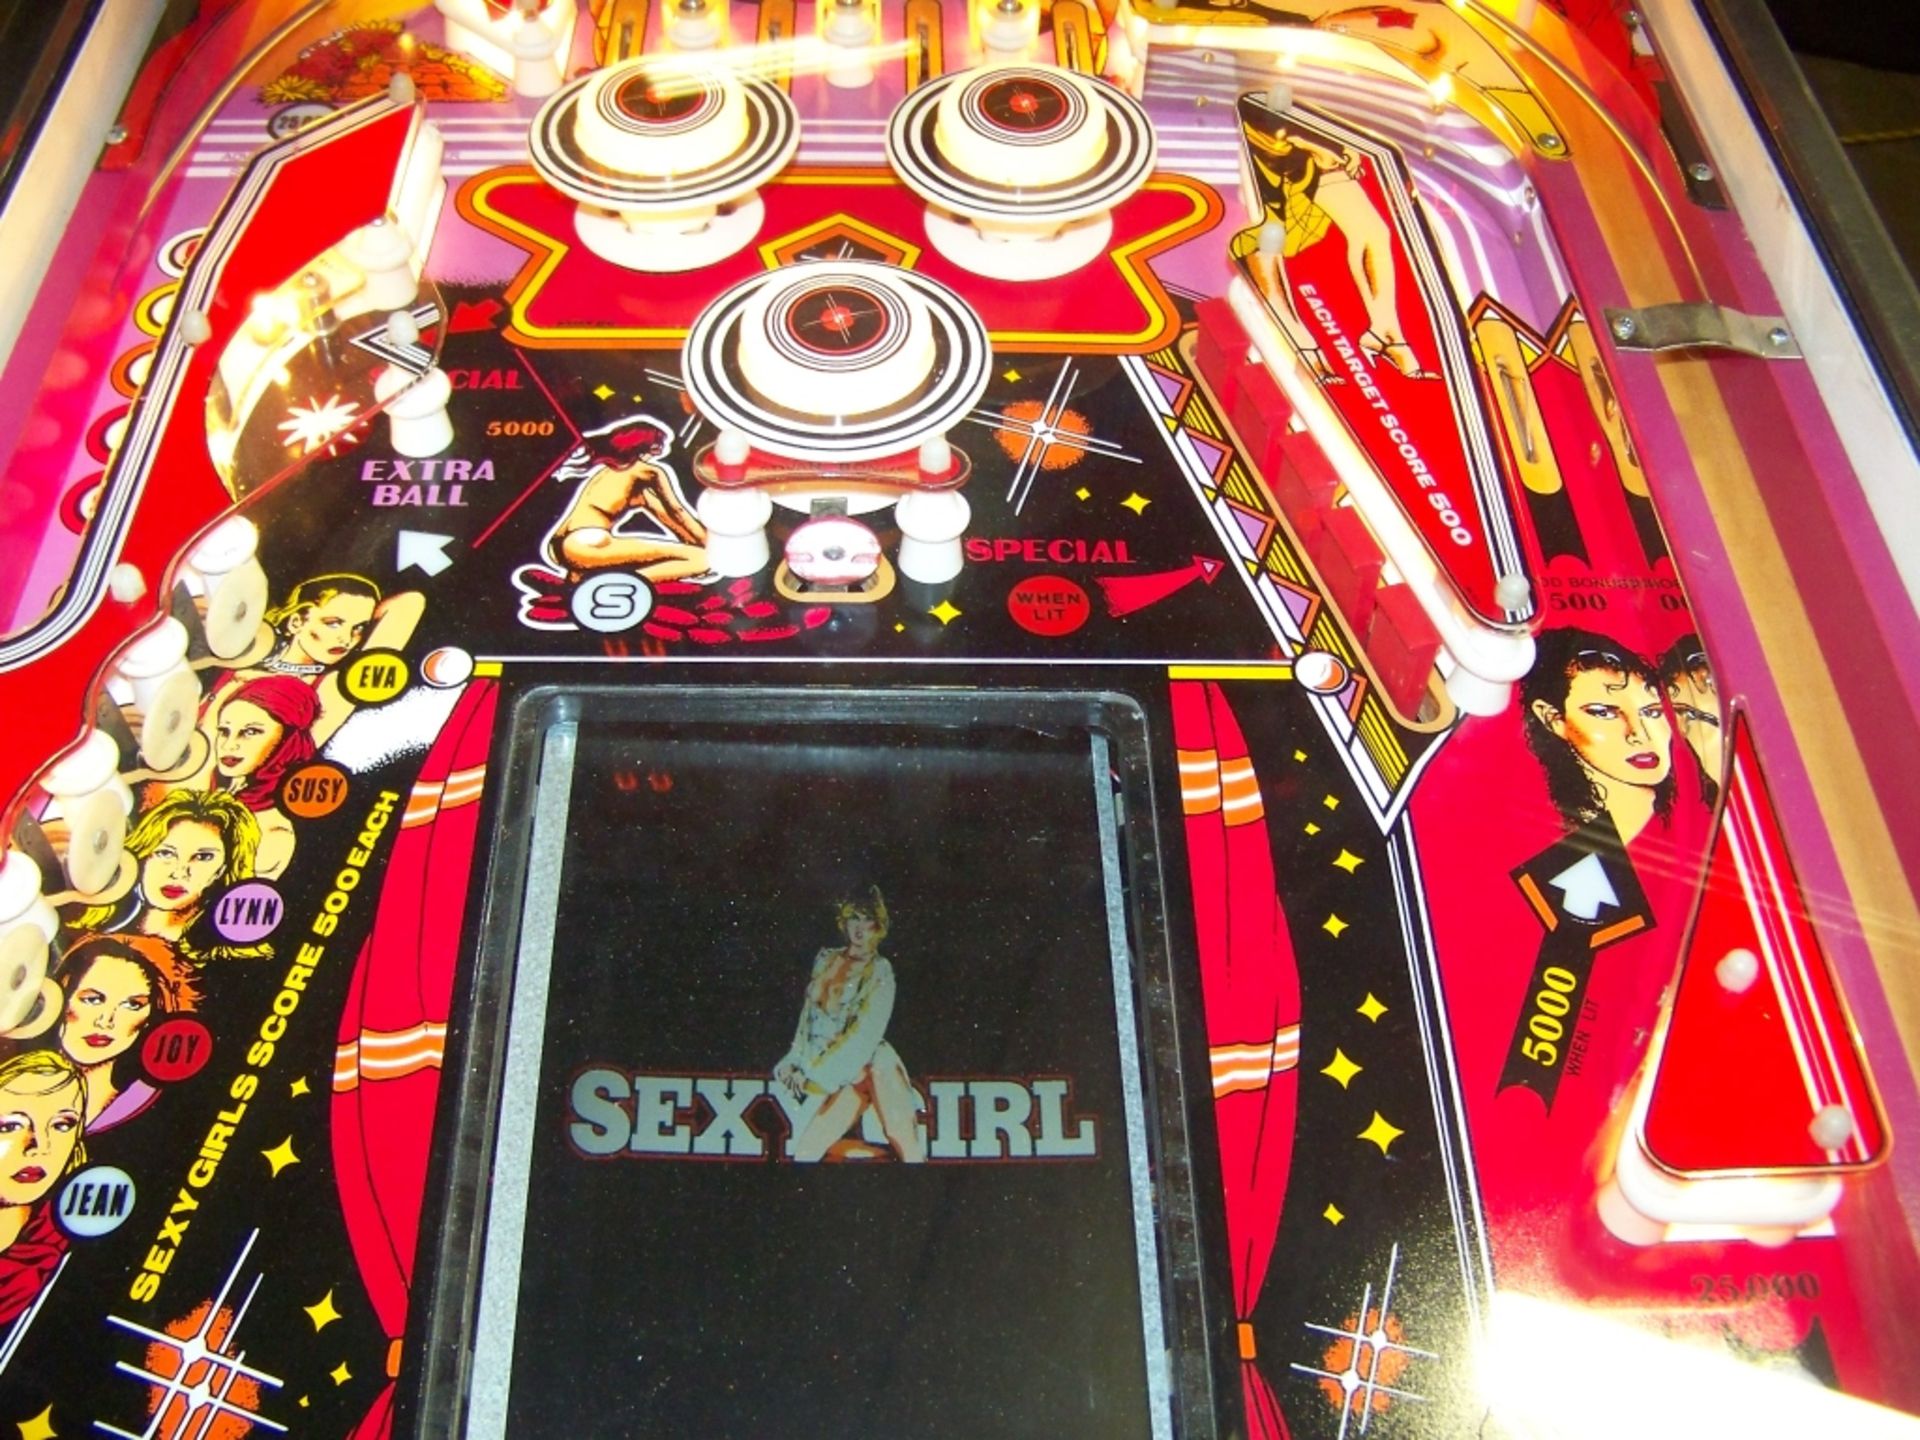 SEXY GIRL PINBALL MACHINE 1980 RANCO AUTOMATEN Item is in used condition. Evidence of wear and - Image 6 of 10